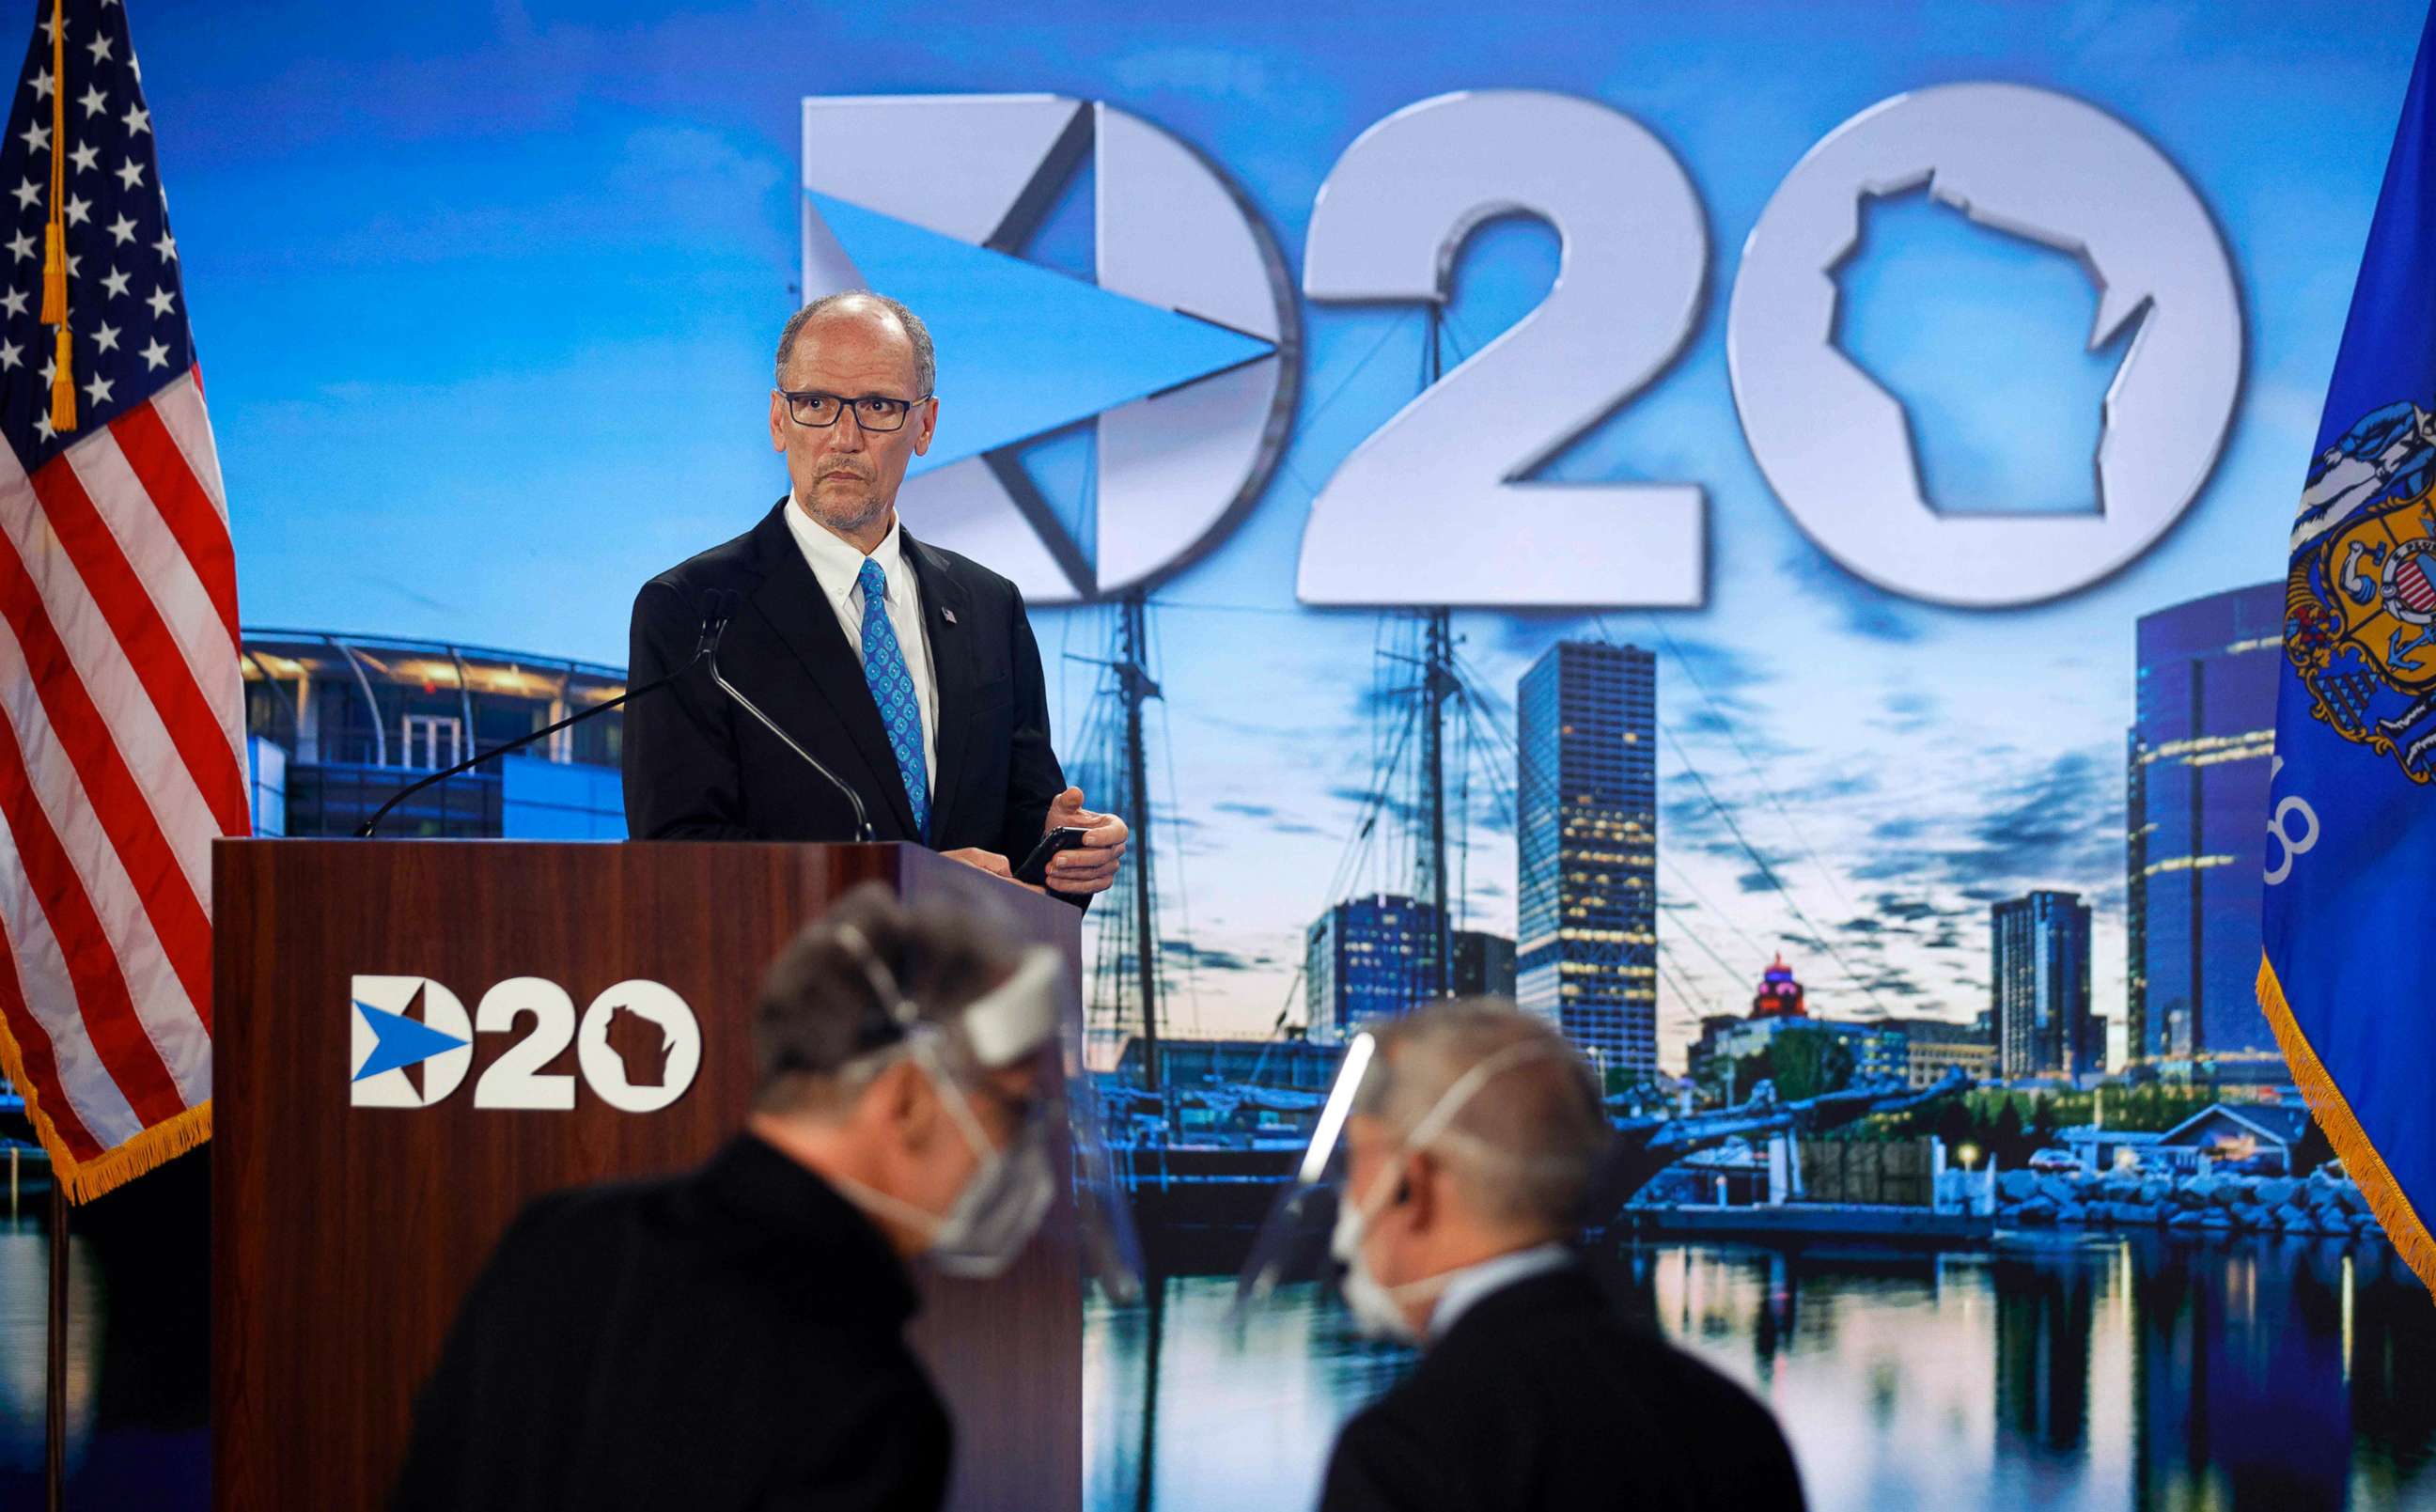 PHOTO: Democratic National Committee Chairman Tom Perez stands at the podium as he prepares to address the second day of the Democratic National Convention, being held virtually amid the novel coronavirus pandemic, in Milwaukee, Aug. 18, 2020.